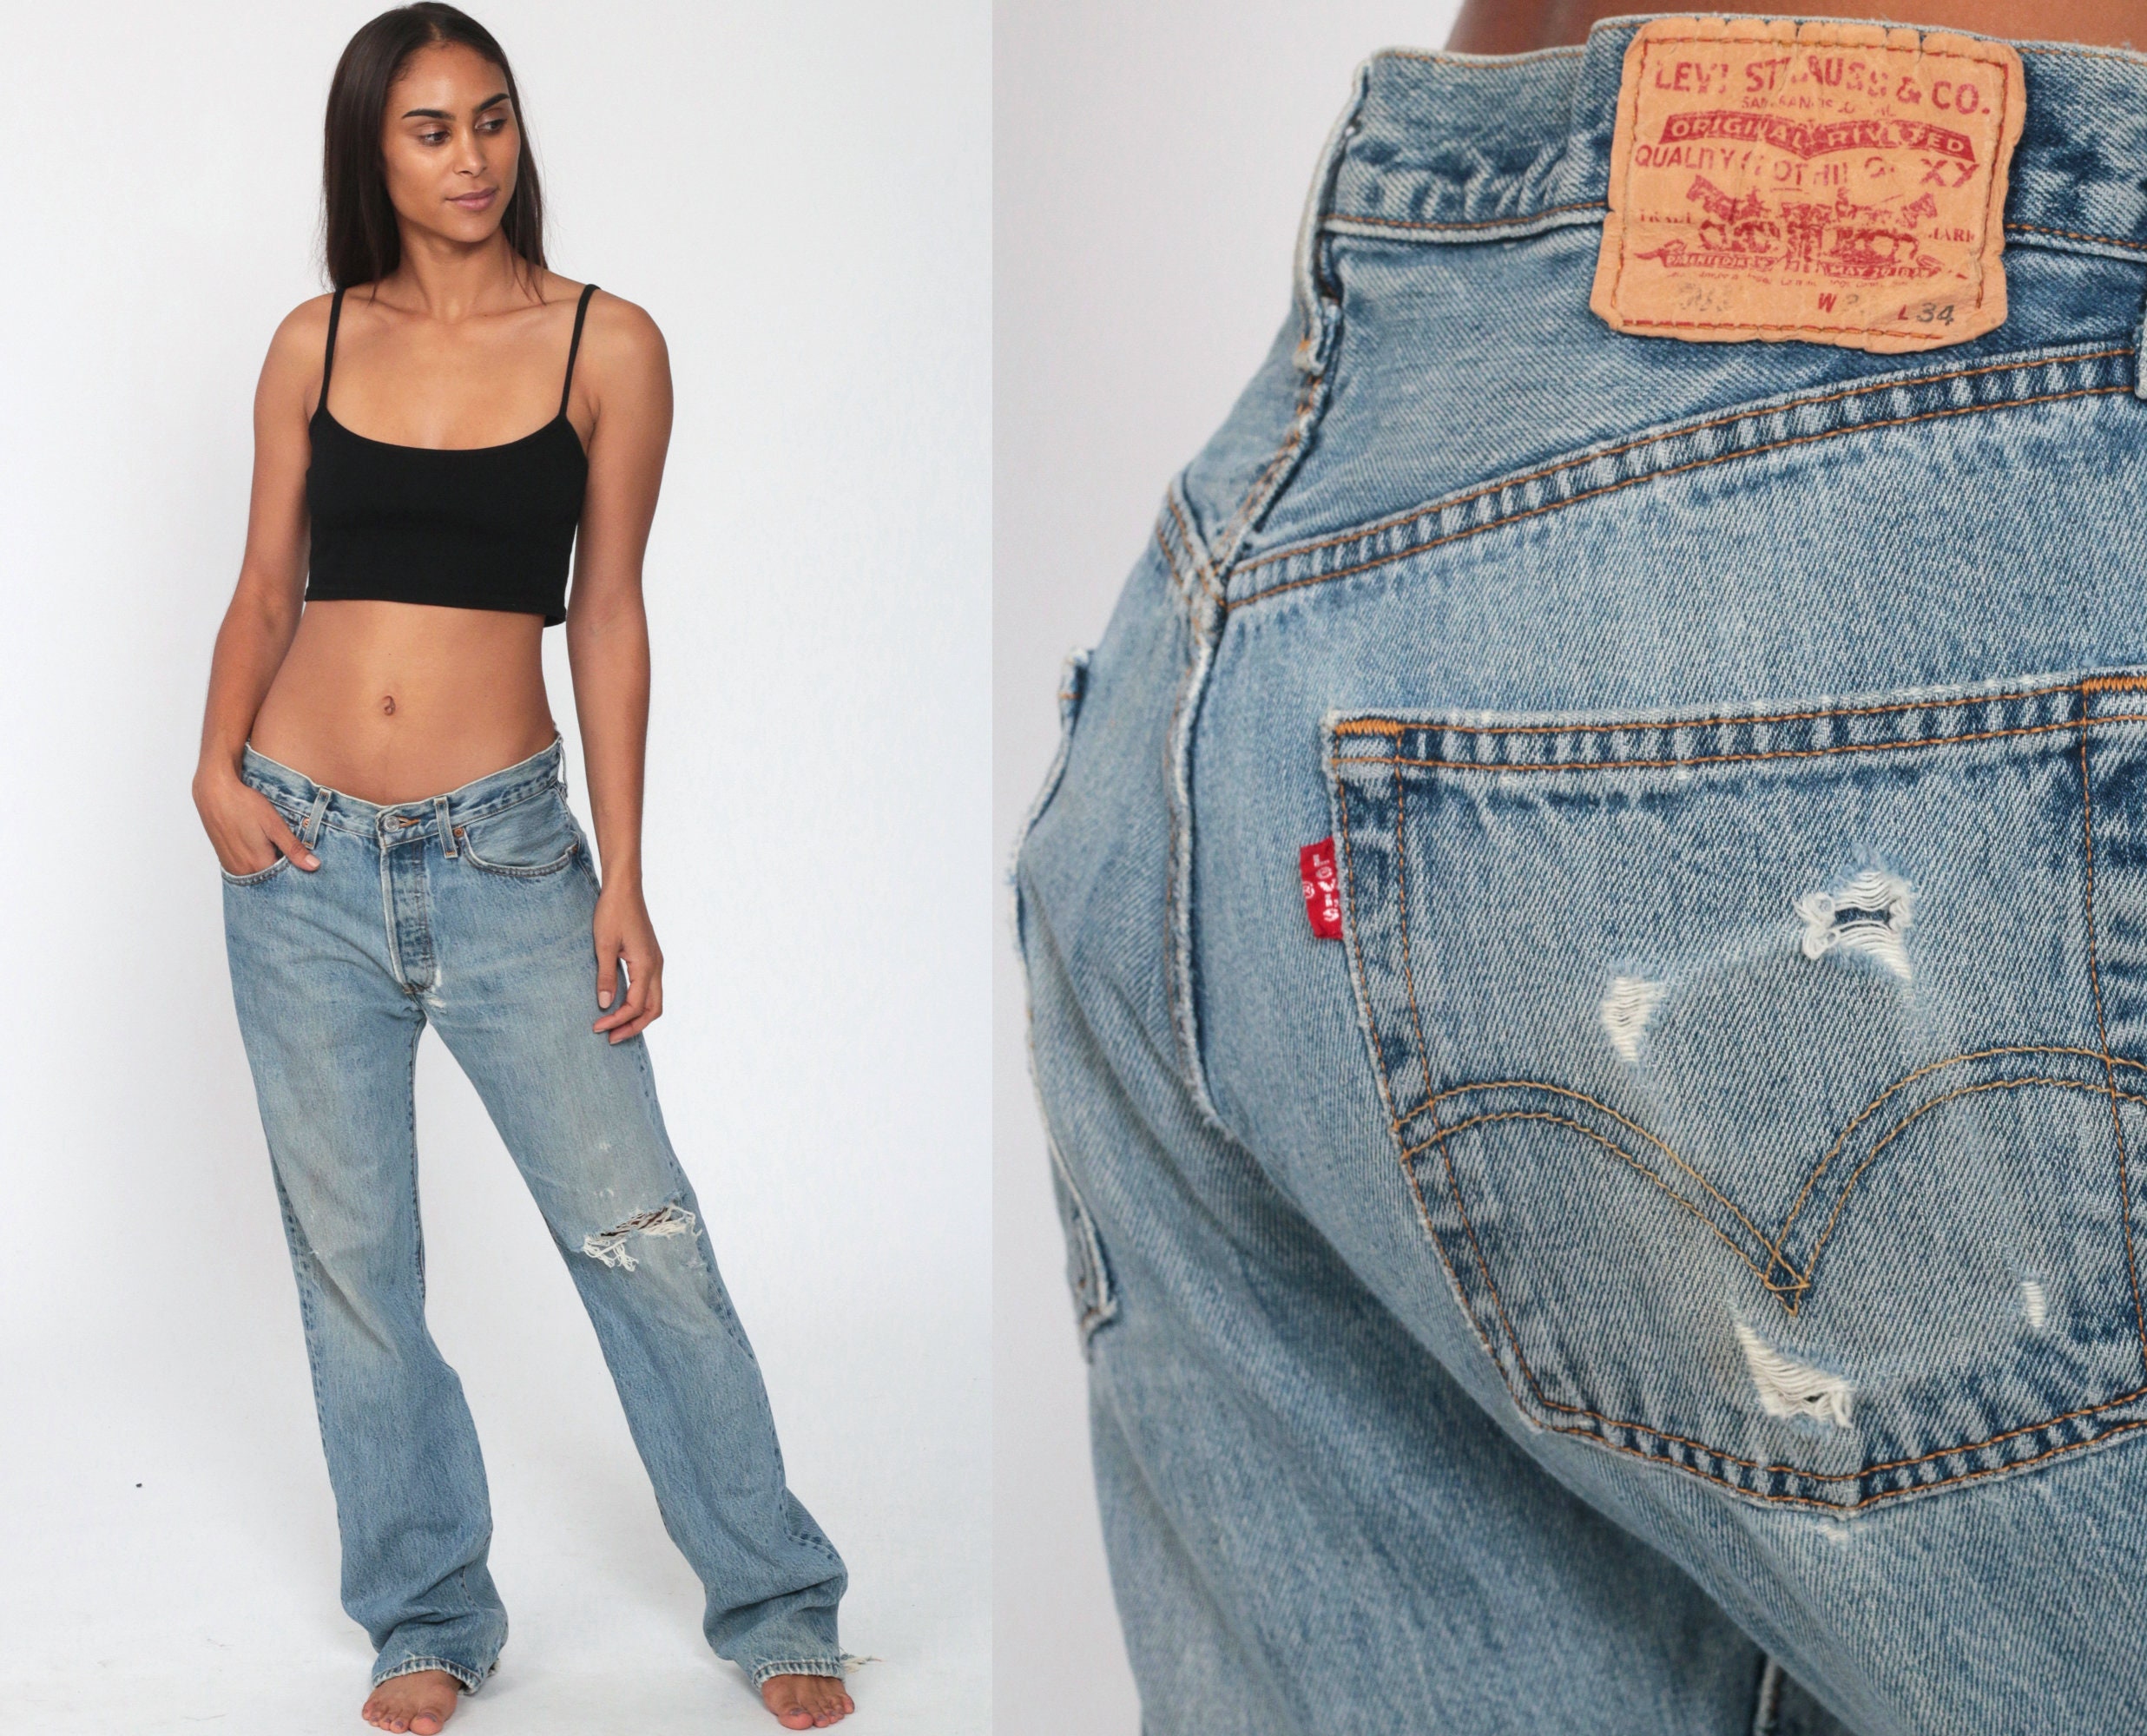 old faded levis